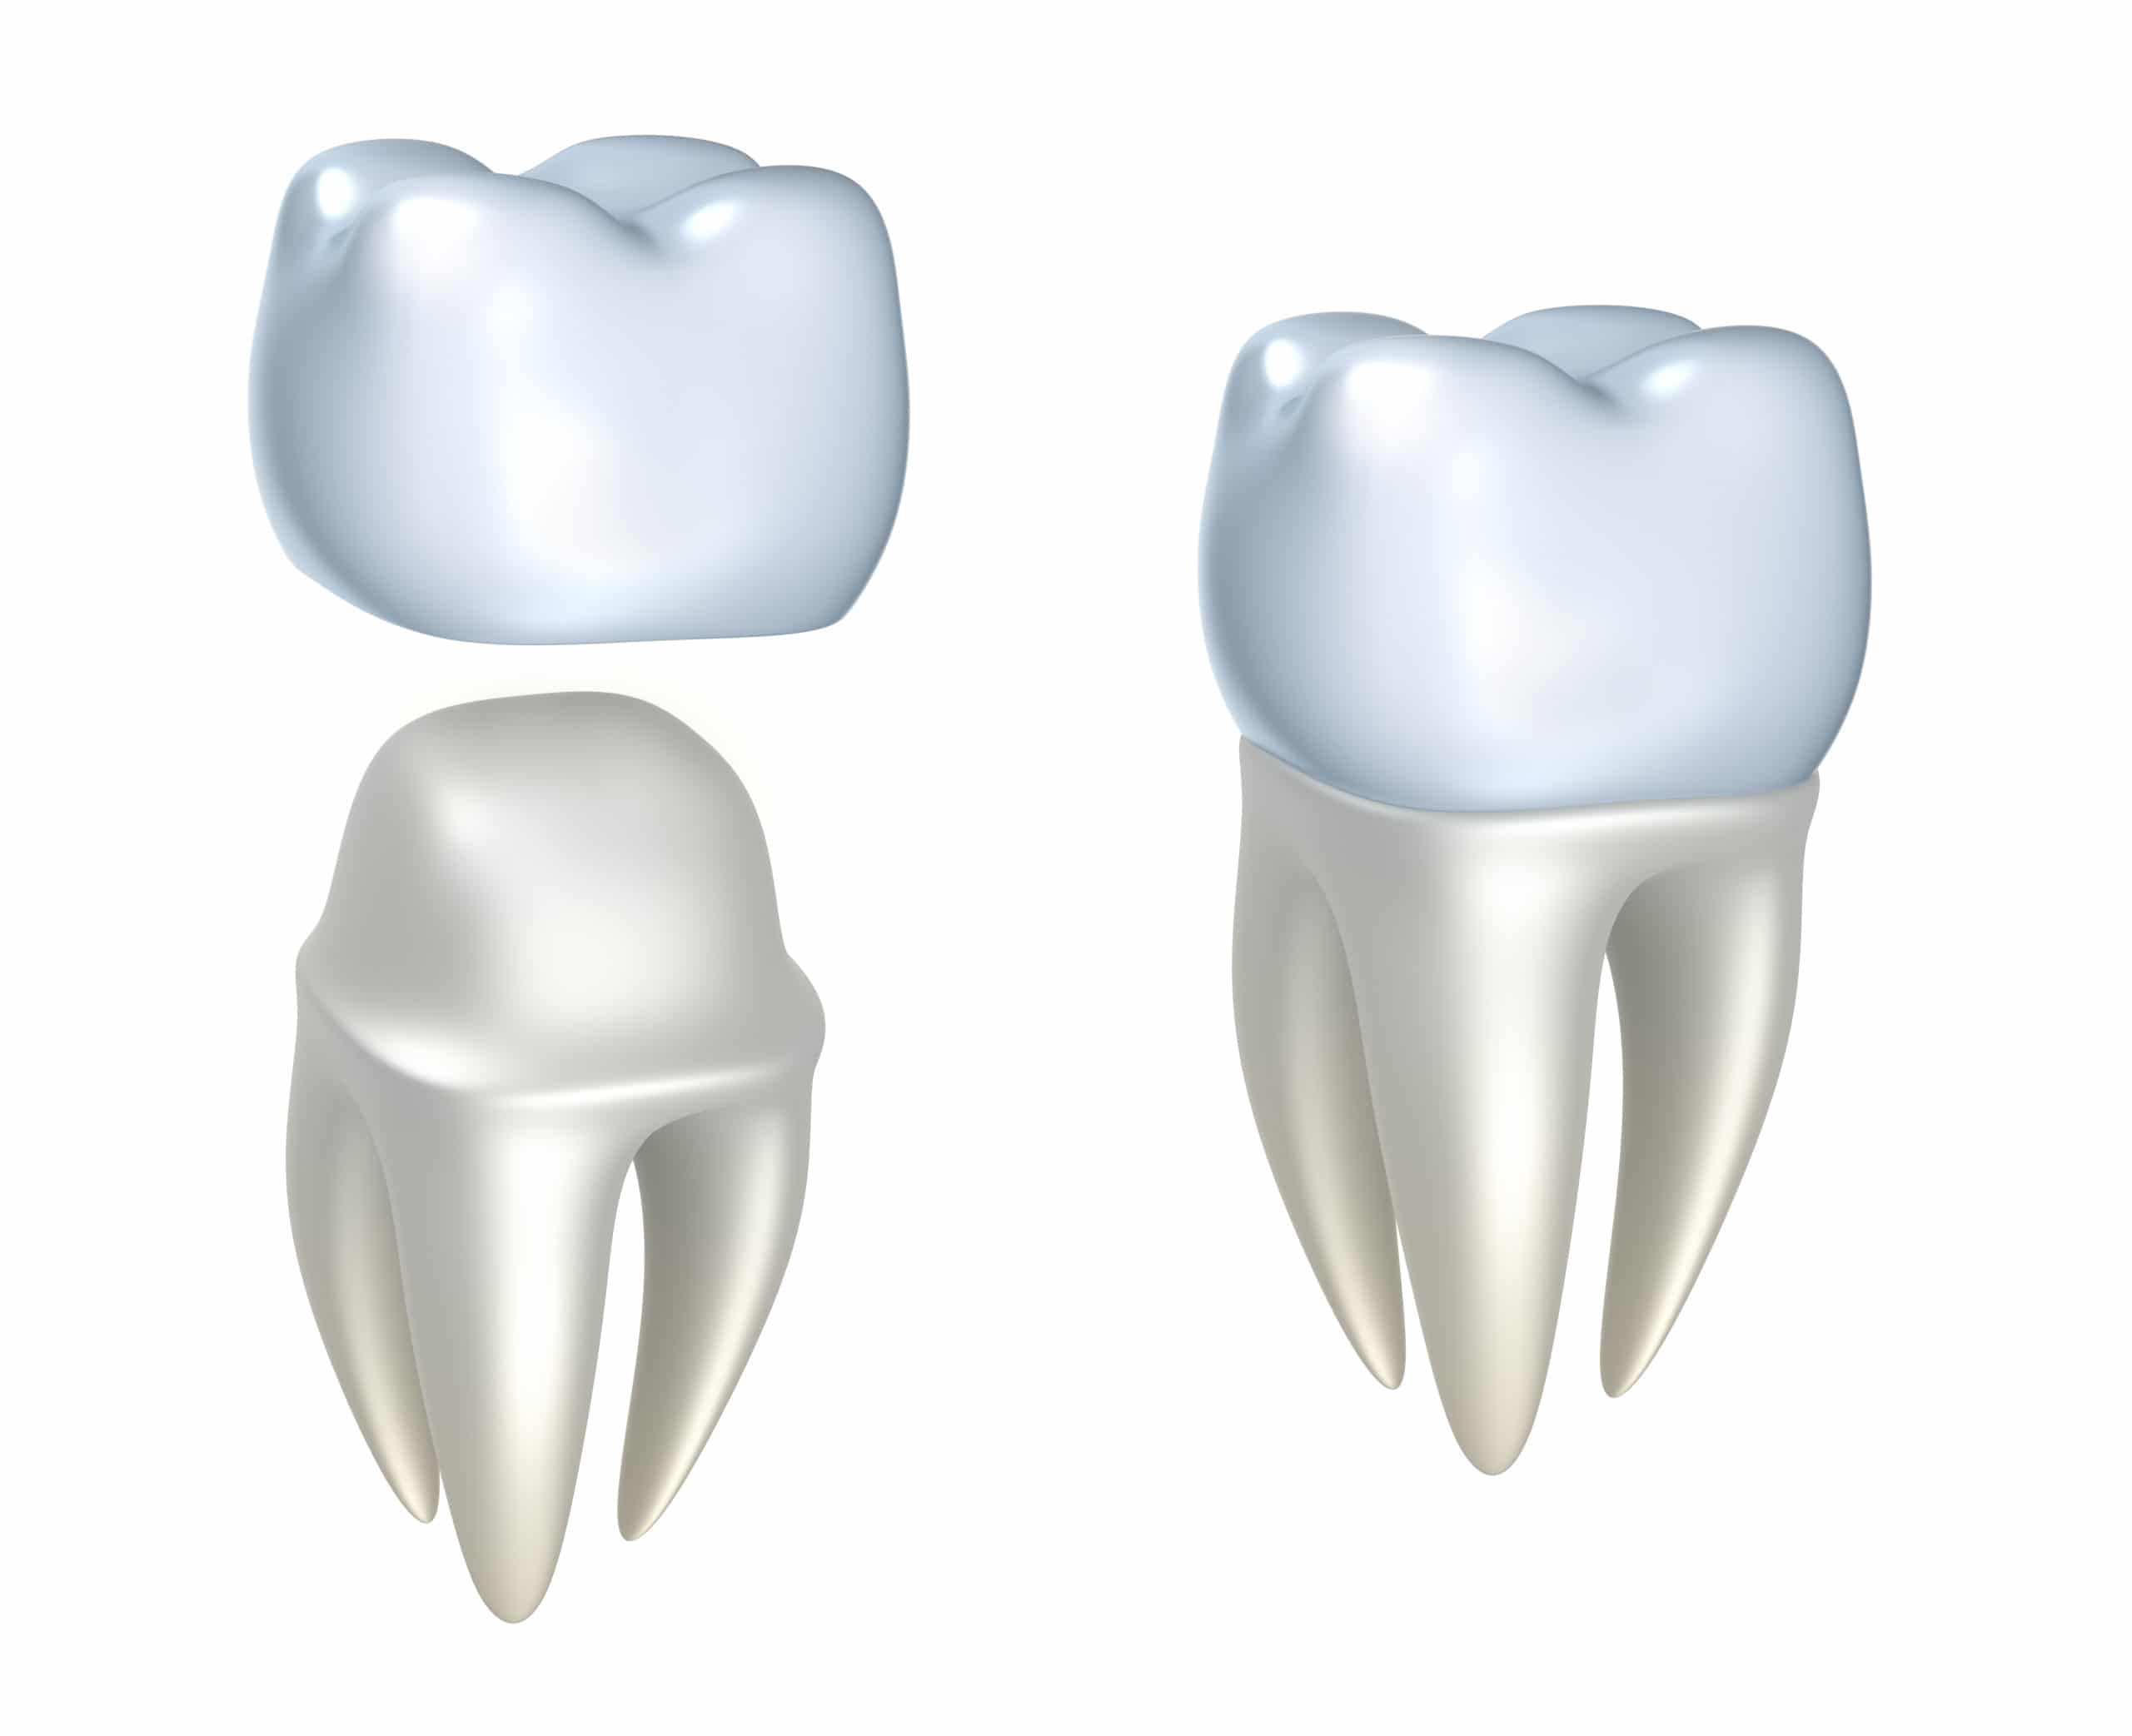 3D-rendered crown before and after being placed on tooth